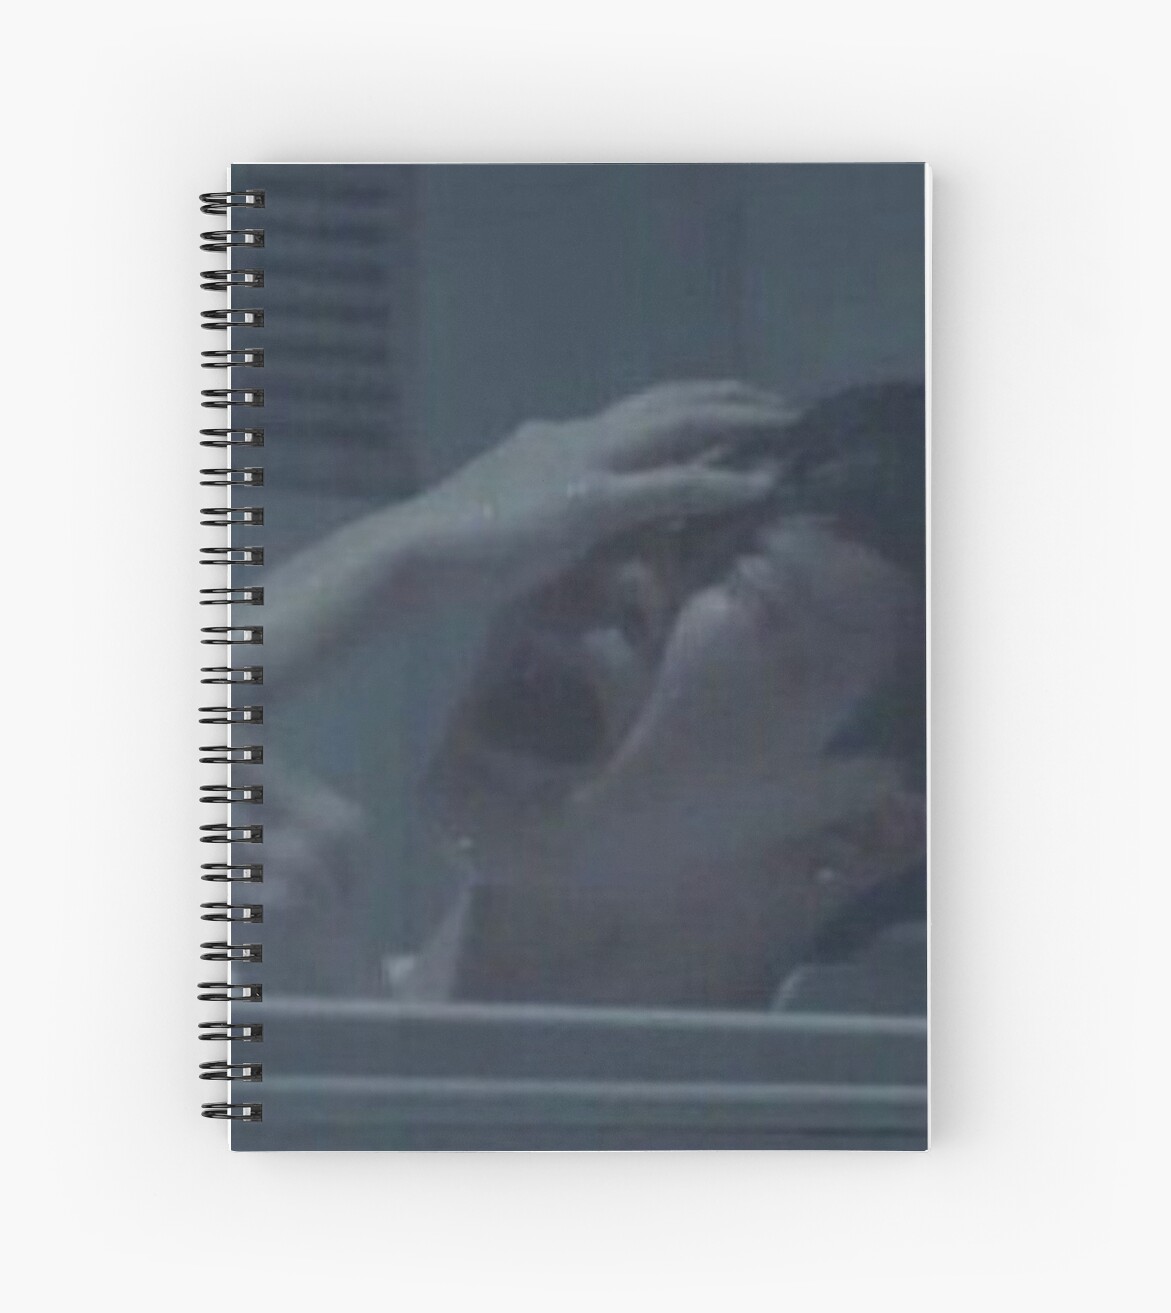 BTS Jimin Crying Meme Spiral Notebooks By Mapao Redbubble